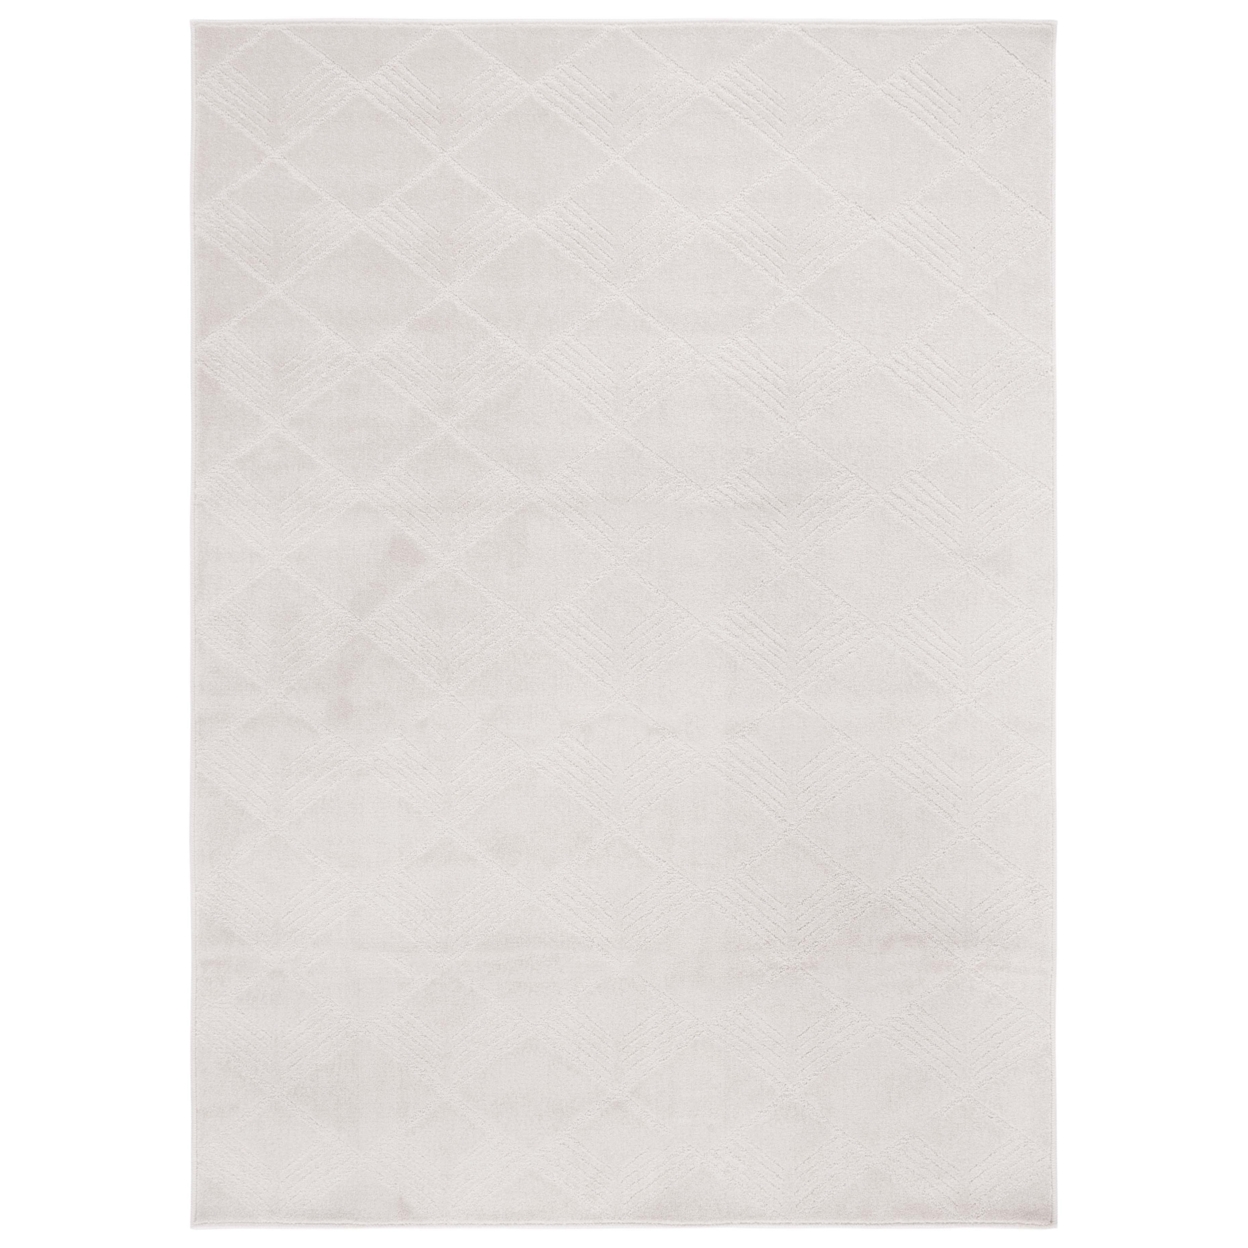 Safavieh PNS414A Pattern And Solid Ivory - Grey / Ivory, 5'-3 X 7'-6 Rectangle